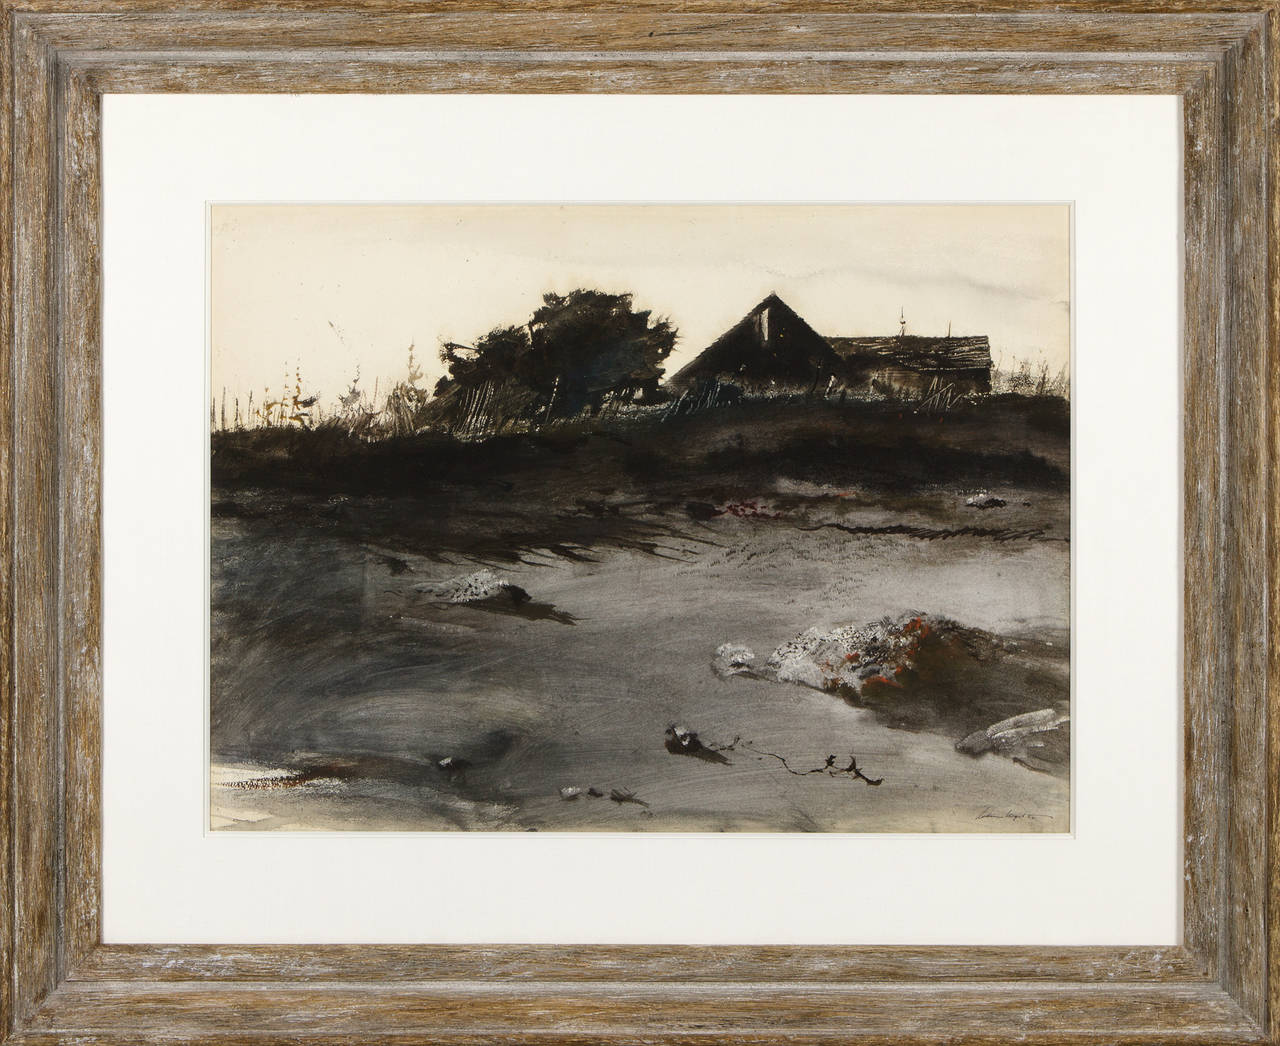 Wet Sand - Painting by Andrew Wyeth